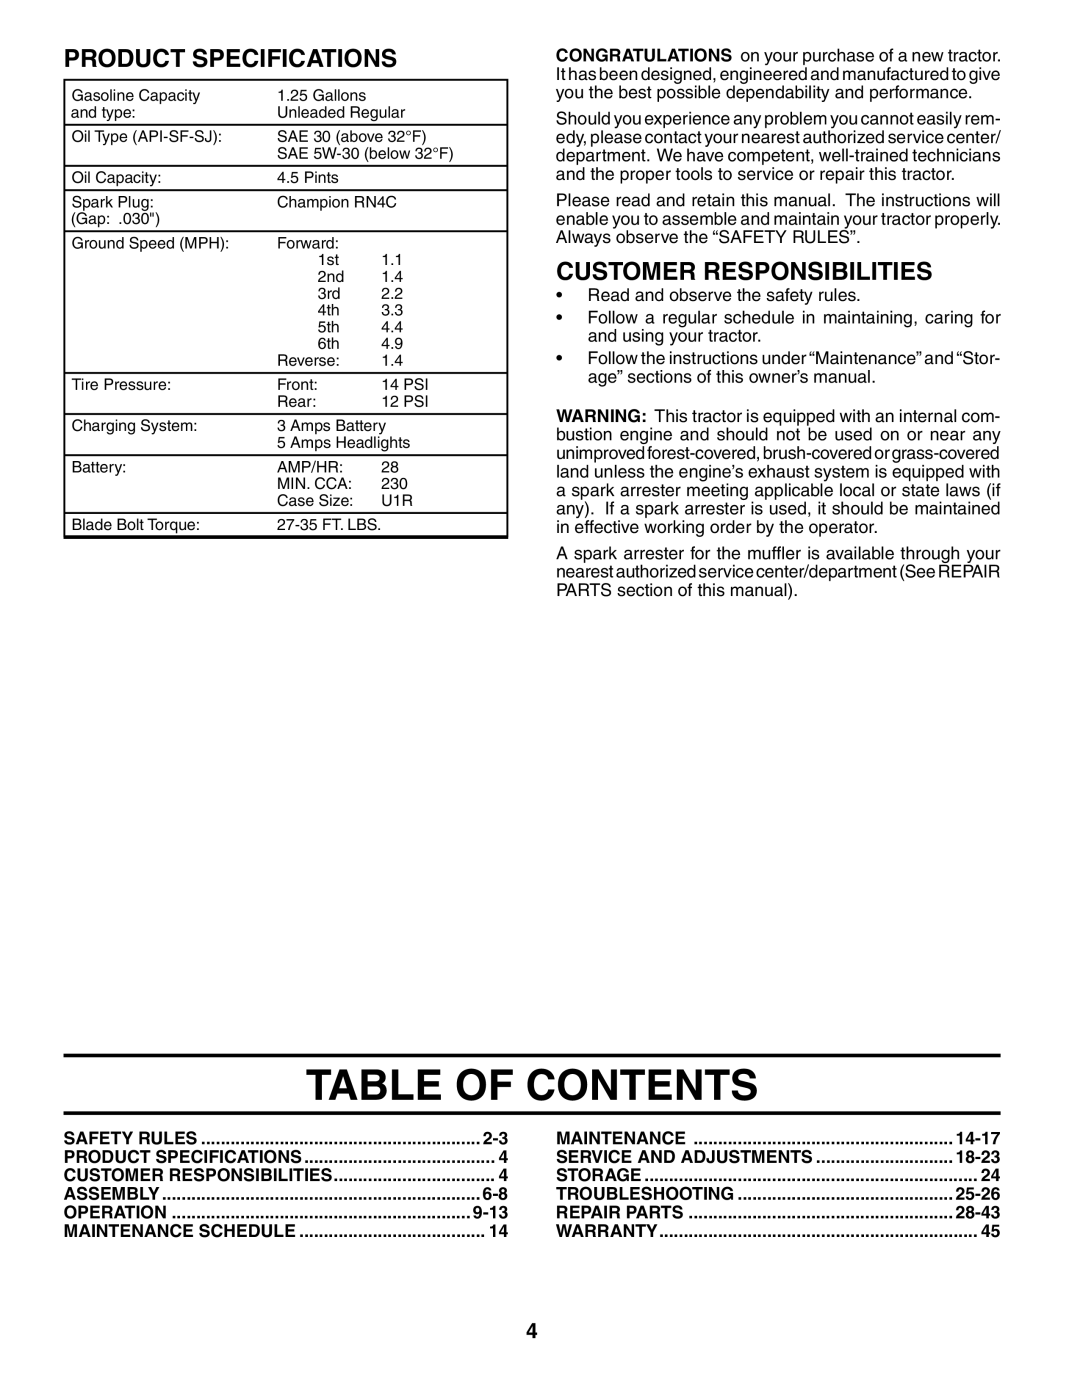 Weed Eater 191064 manual Table Of Contents, Product Specifications, Customer Responsibilities 